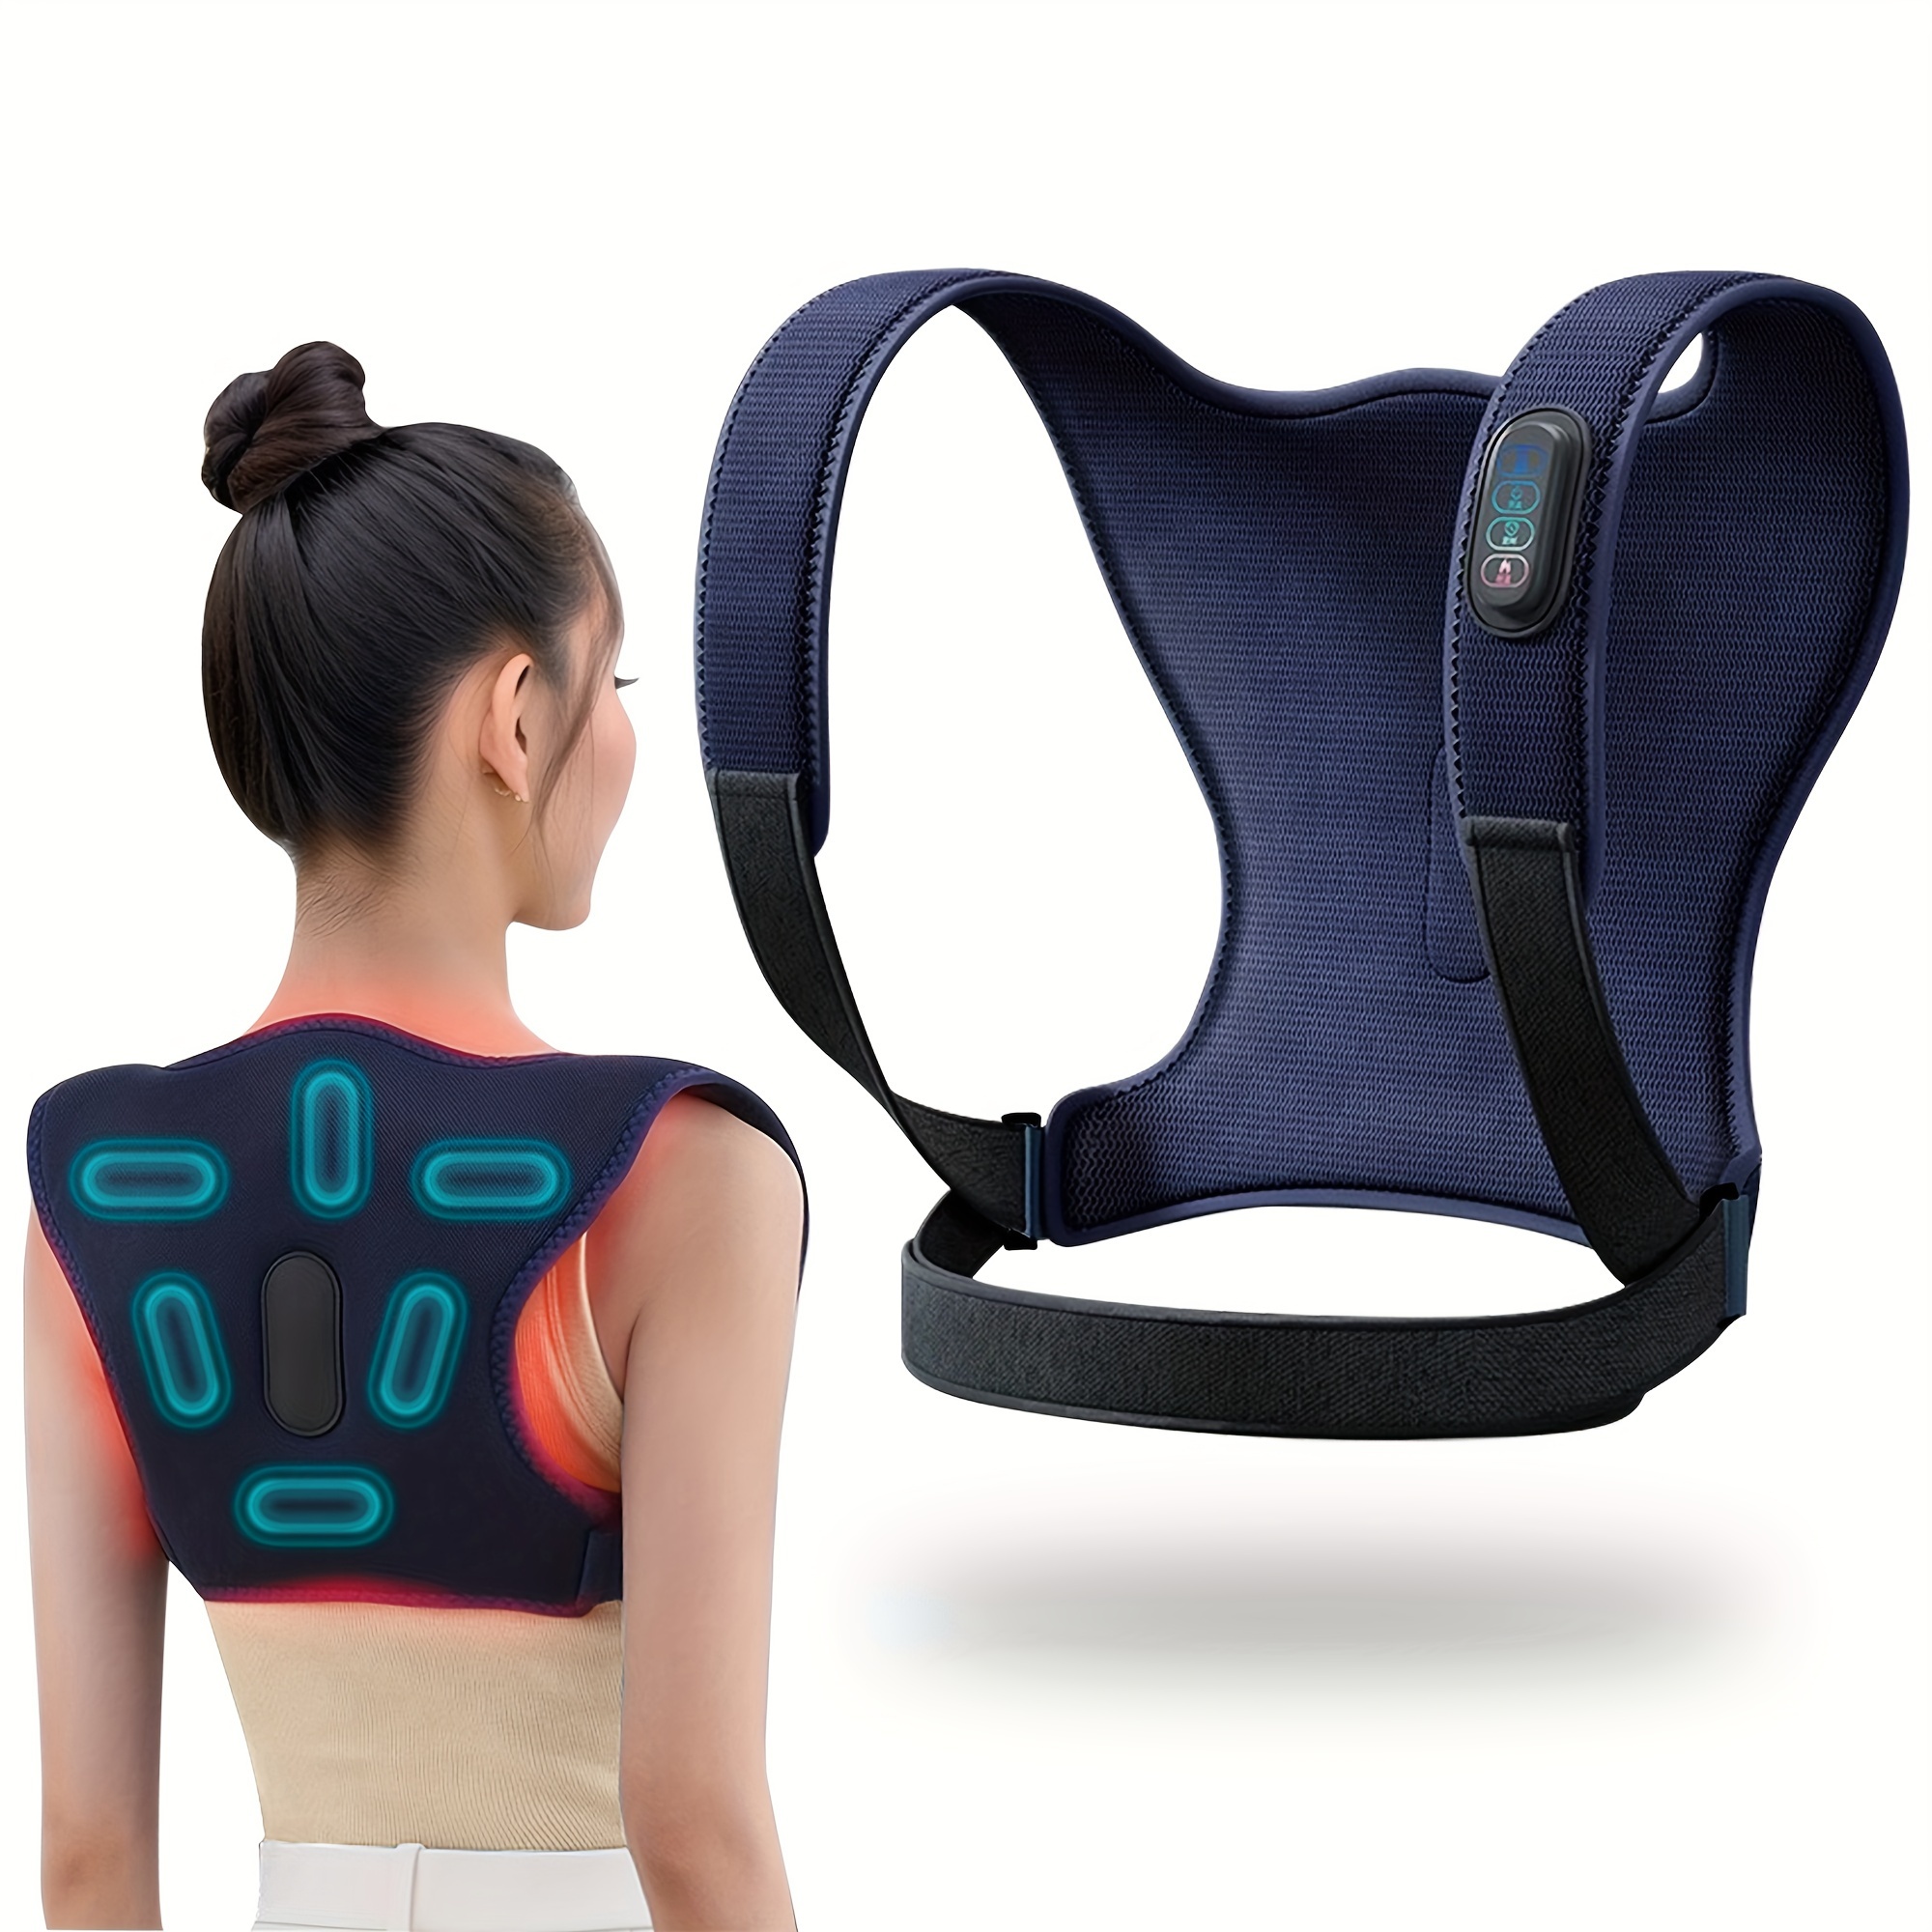 

Portable Back And Shoulder Massager With Heat, Cordless Posture Corrector Brace, Adjustable Upper Back Straightener, For Home & Office Use, Gifts For Women Men Family